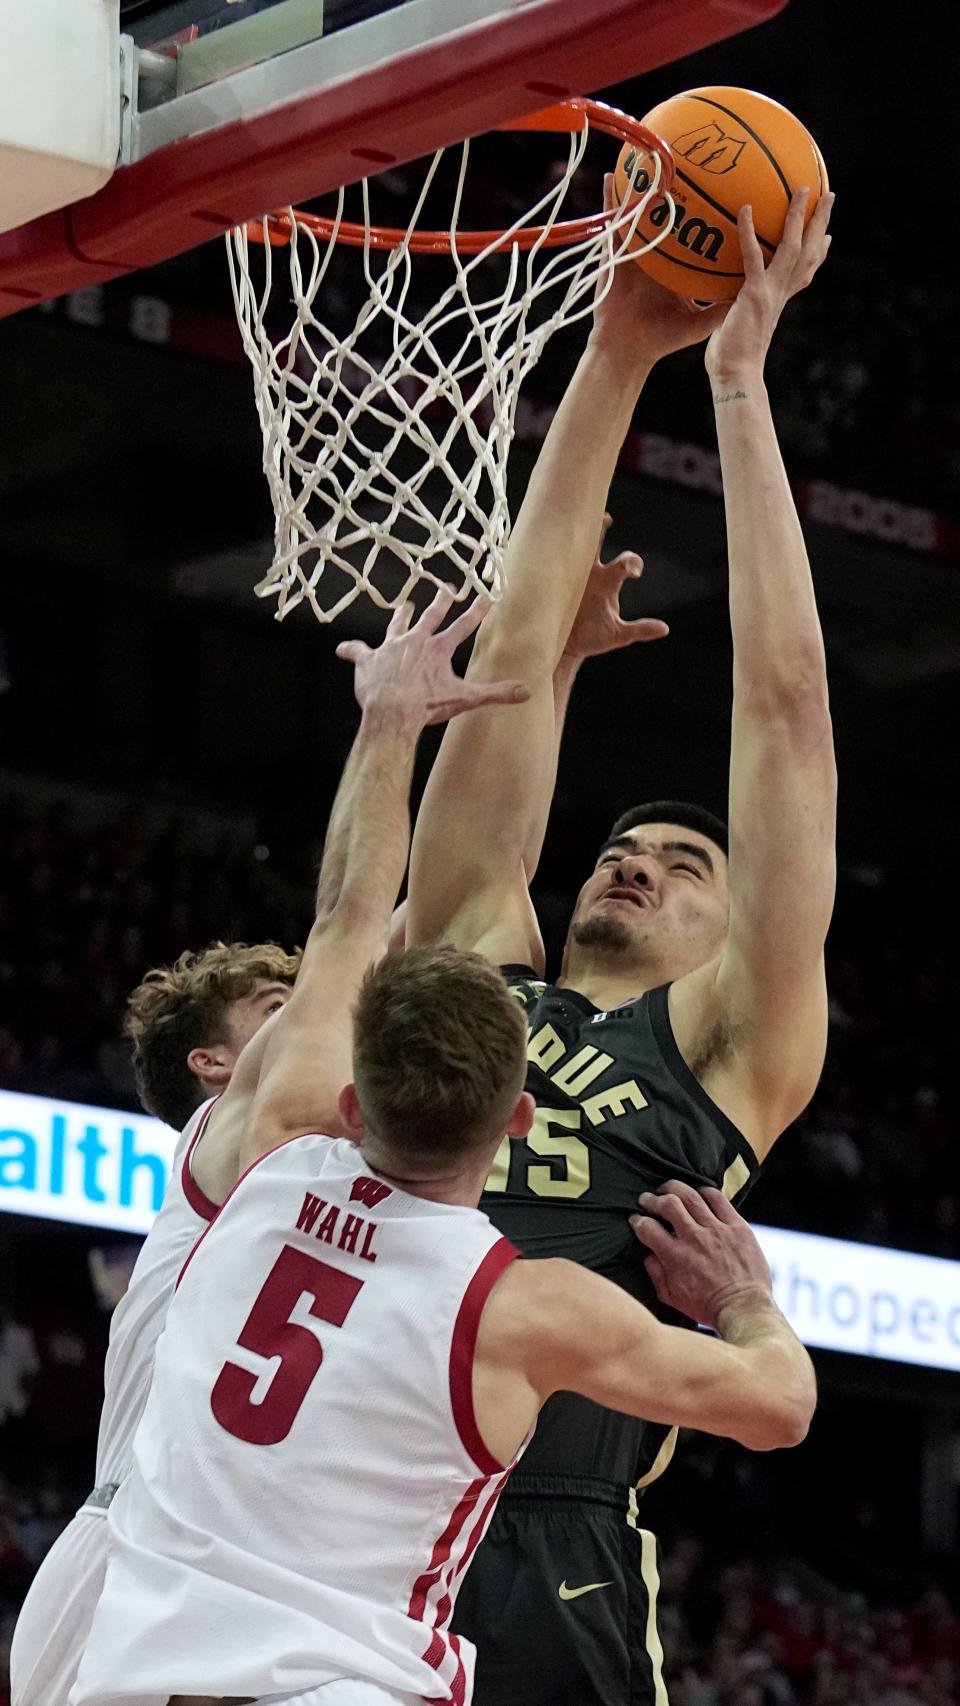 Purdue center Zach Edey (15) misses a dunk while being defended by Wisconsin forward Tyler Wahl (5) and guard Max Klesmit (11) during the first half of their game Thursday, March 2, 2023 at the Kohl Center in Madison, Wis.